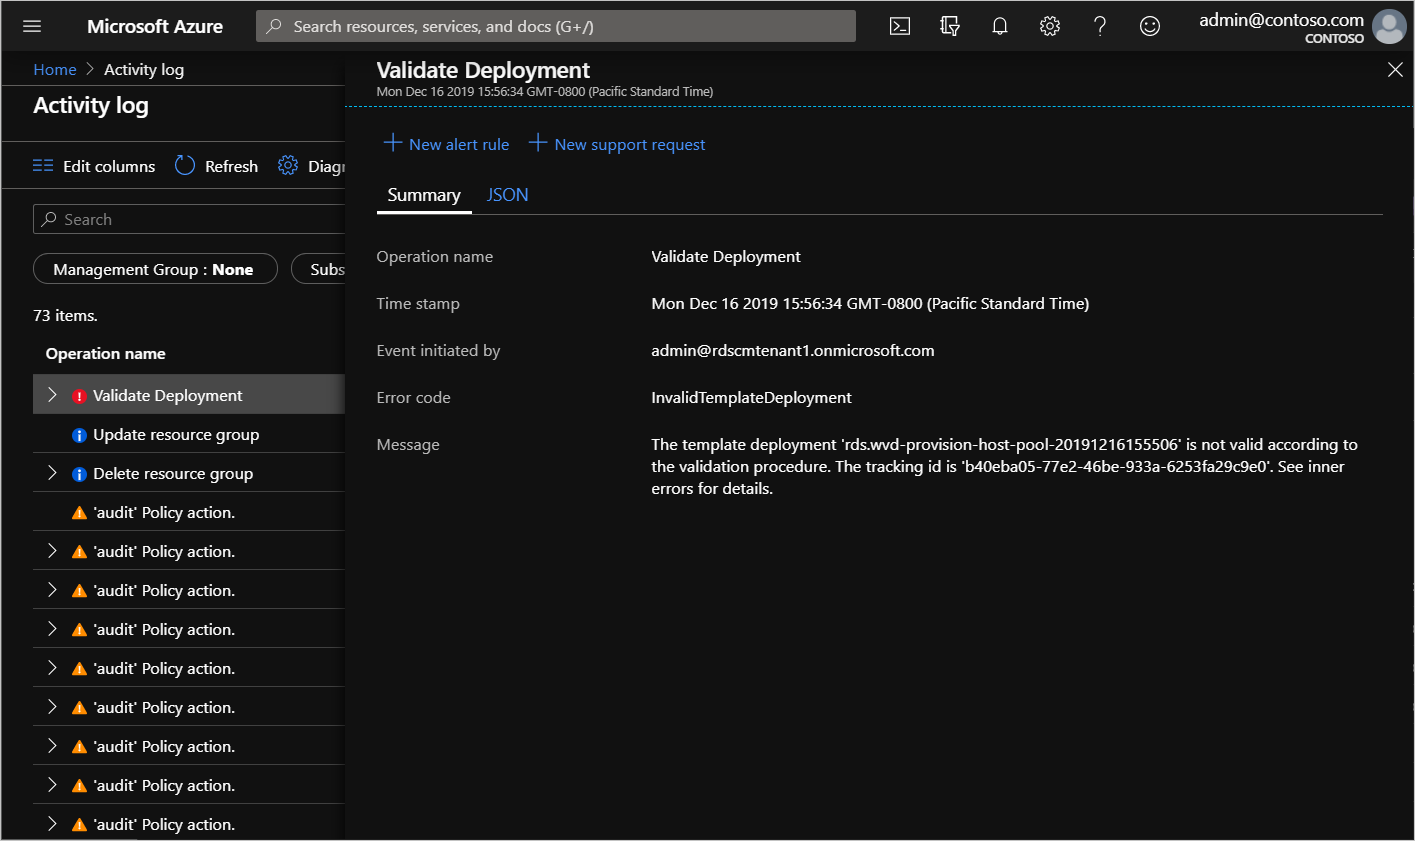 Screenshot of individual Validate Deployment activity with a Failed status